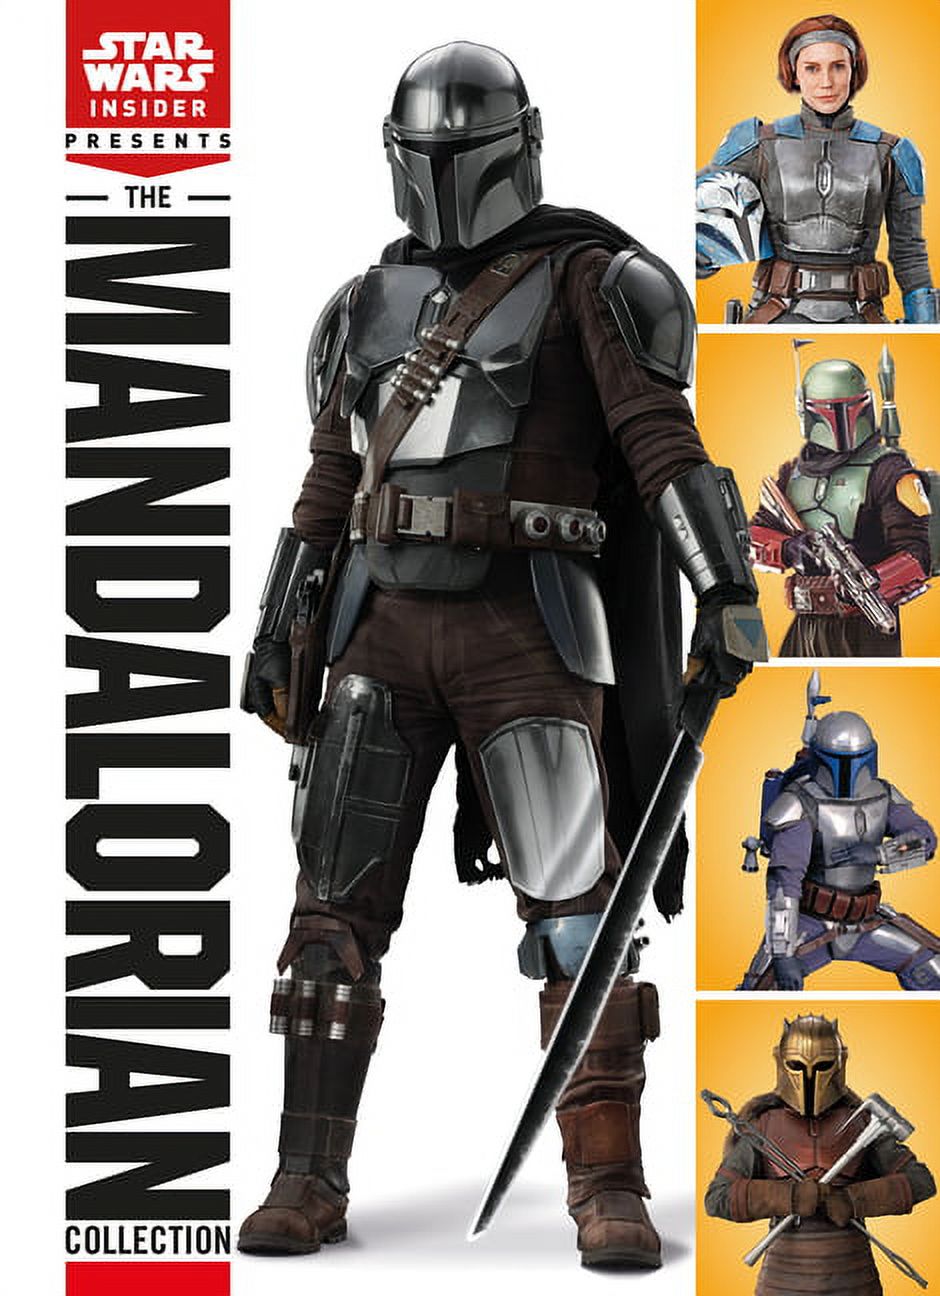 Star Wars: The Mandalorian Collection (Hardcover) - image 1 of 1